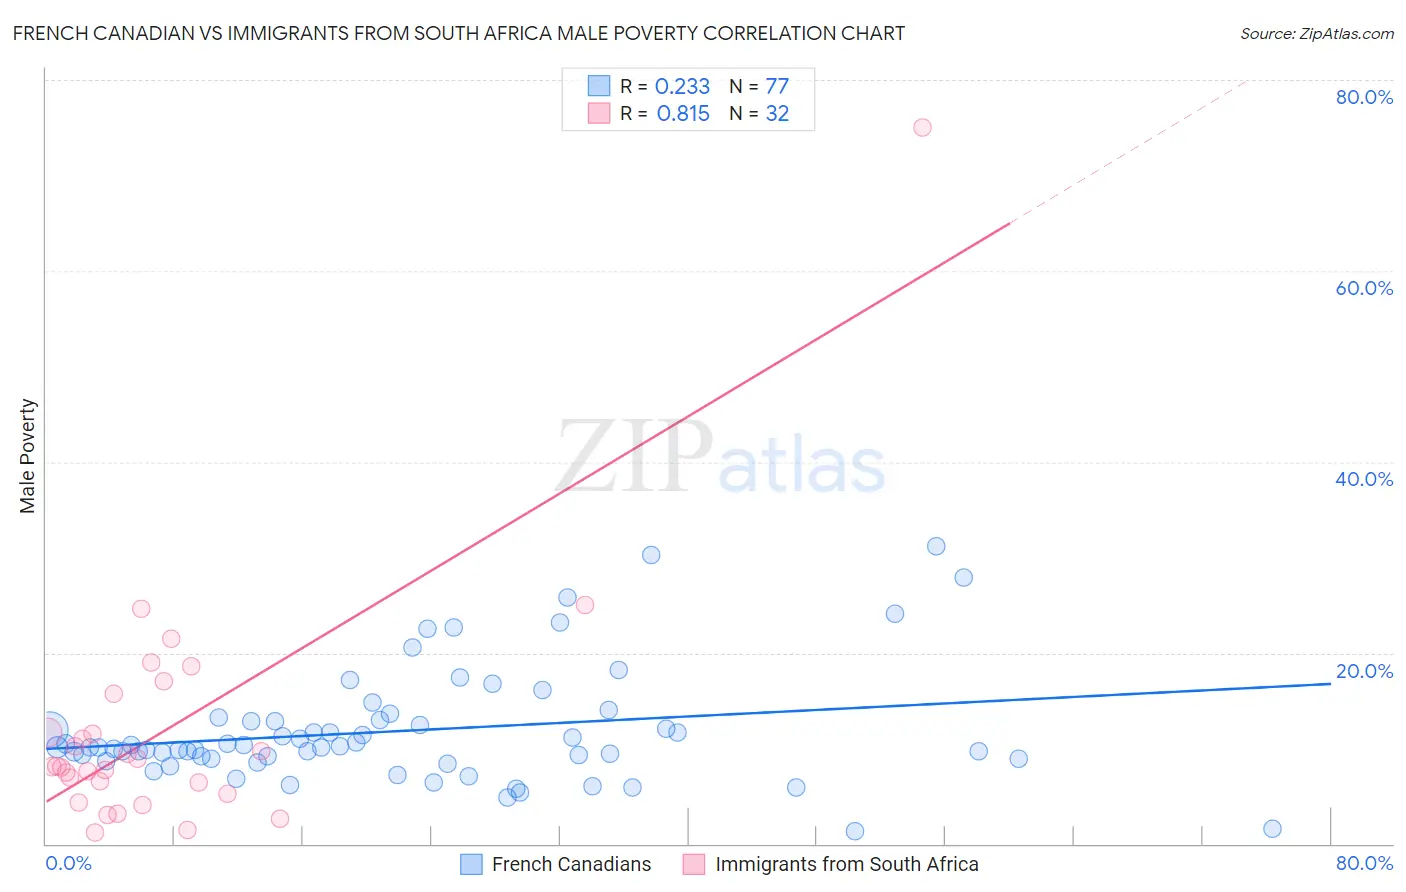 French Canadian vs Immigrants from South Africa Male Poverty